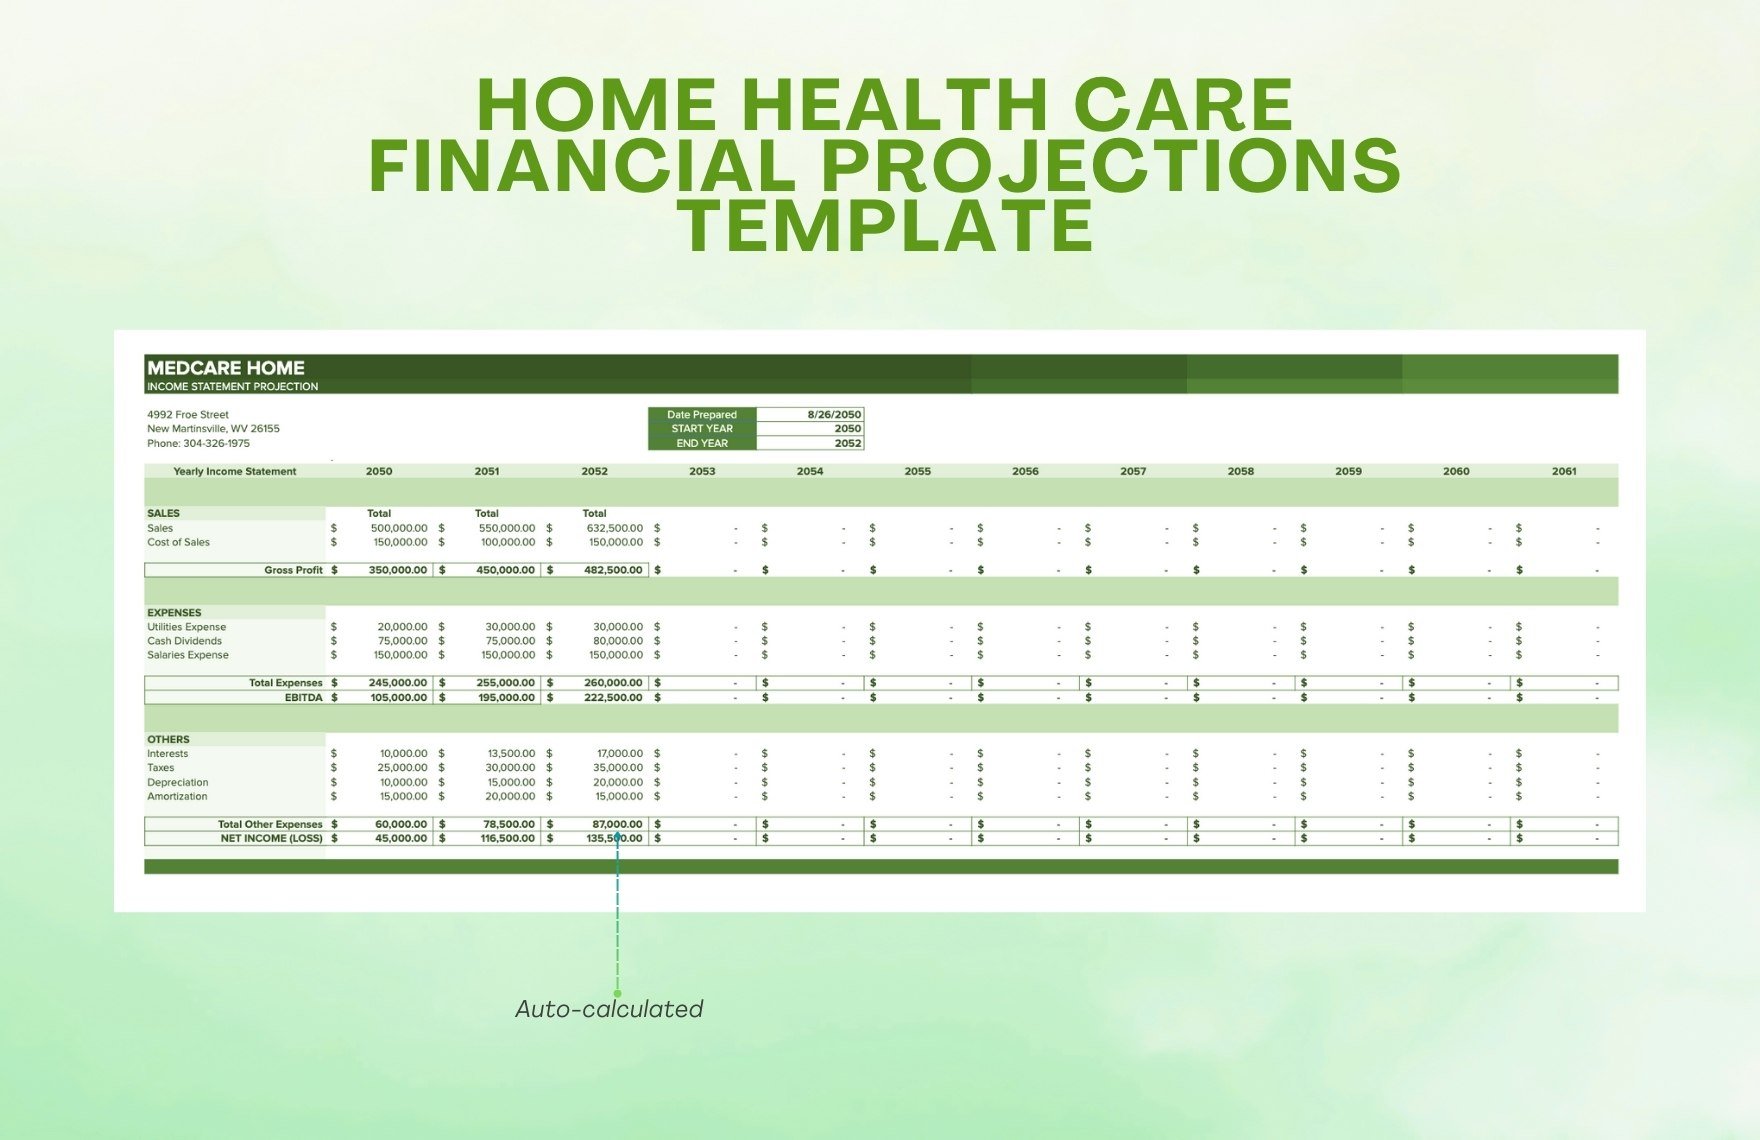 Home Health Care Financial Projections Template